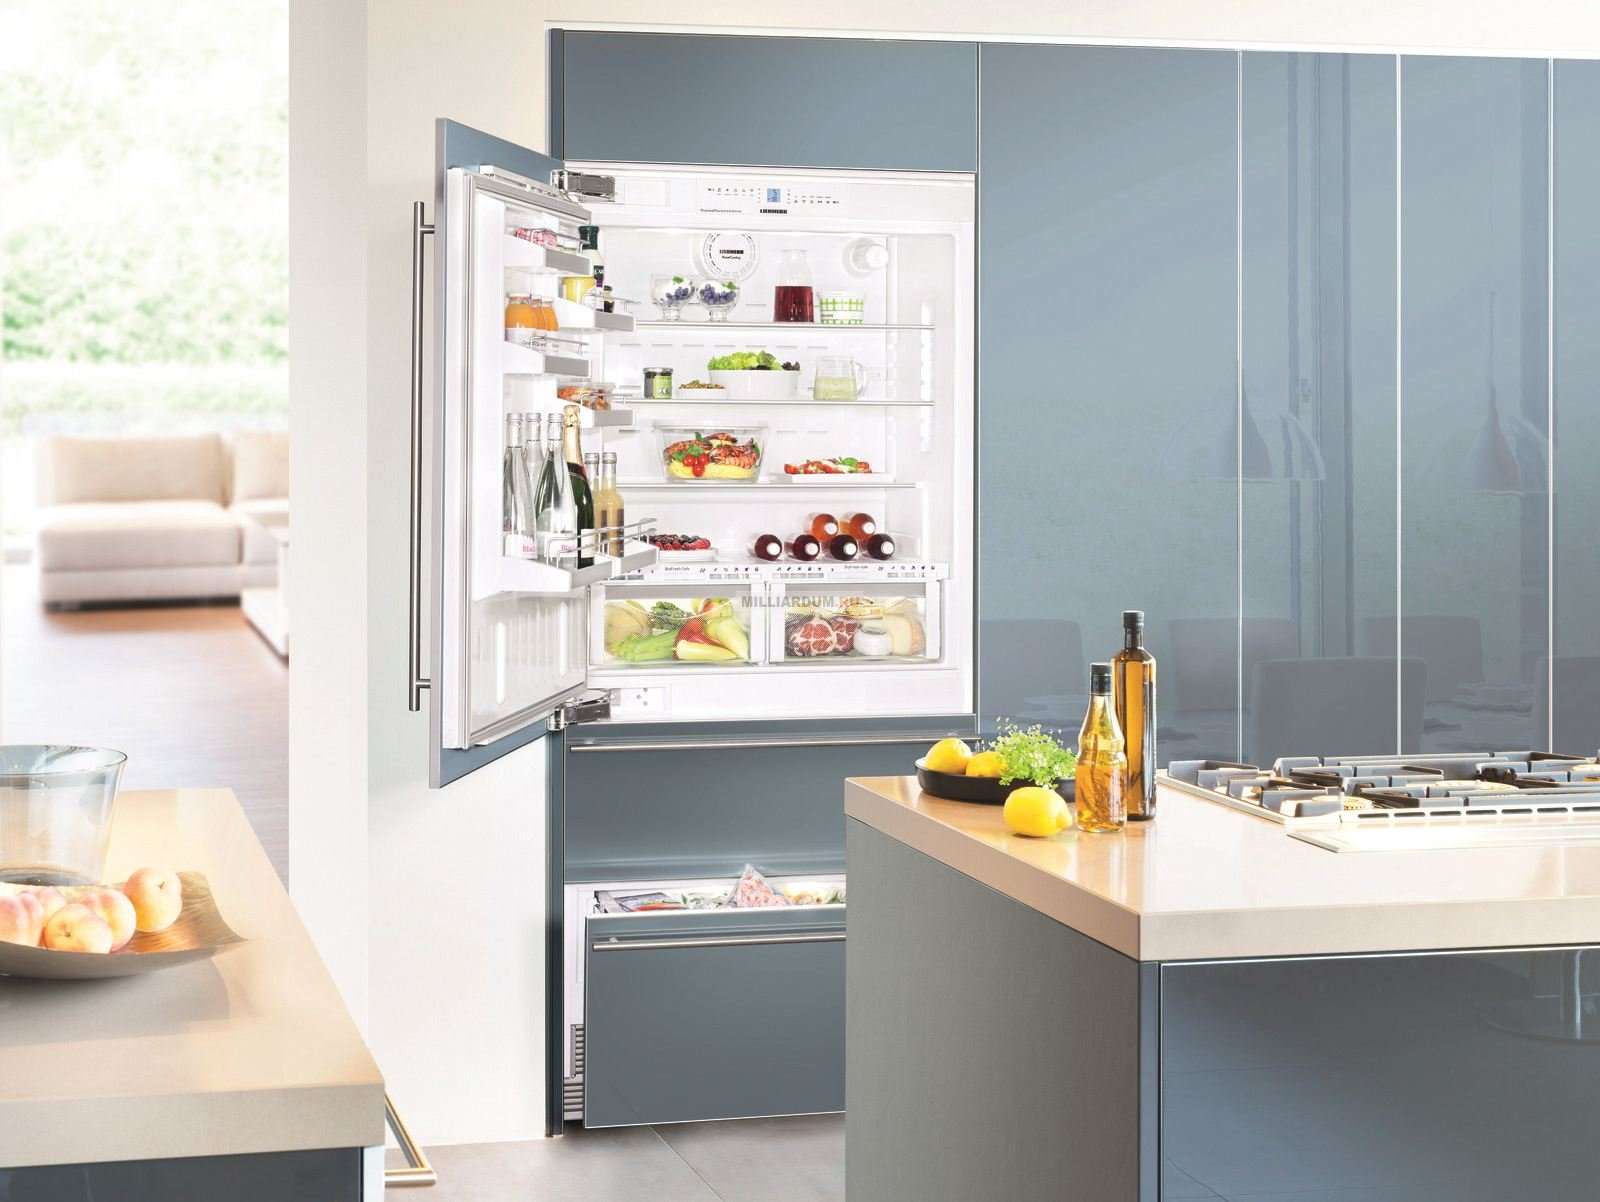 large fridge in the style of the kitchen in light color